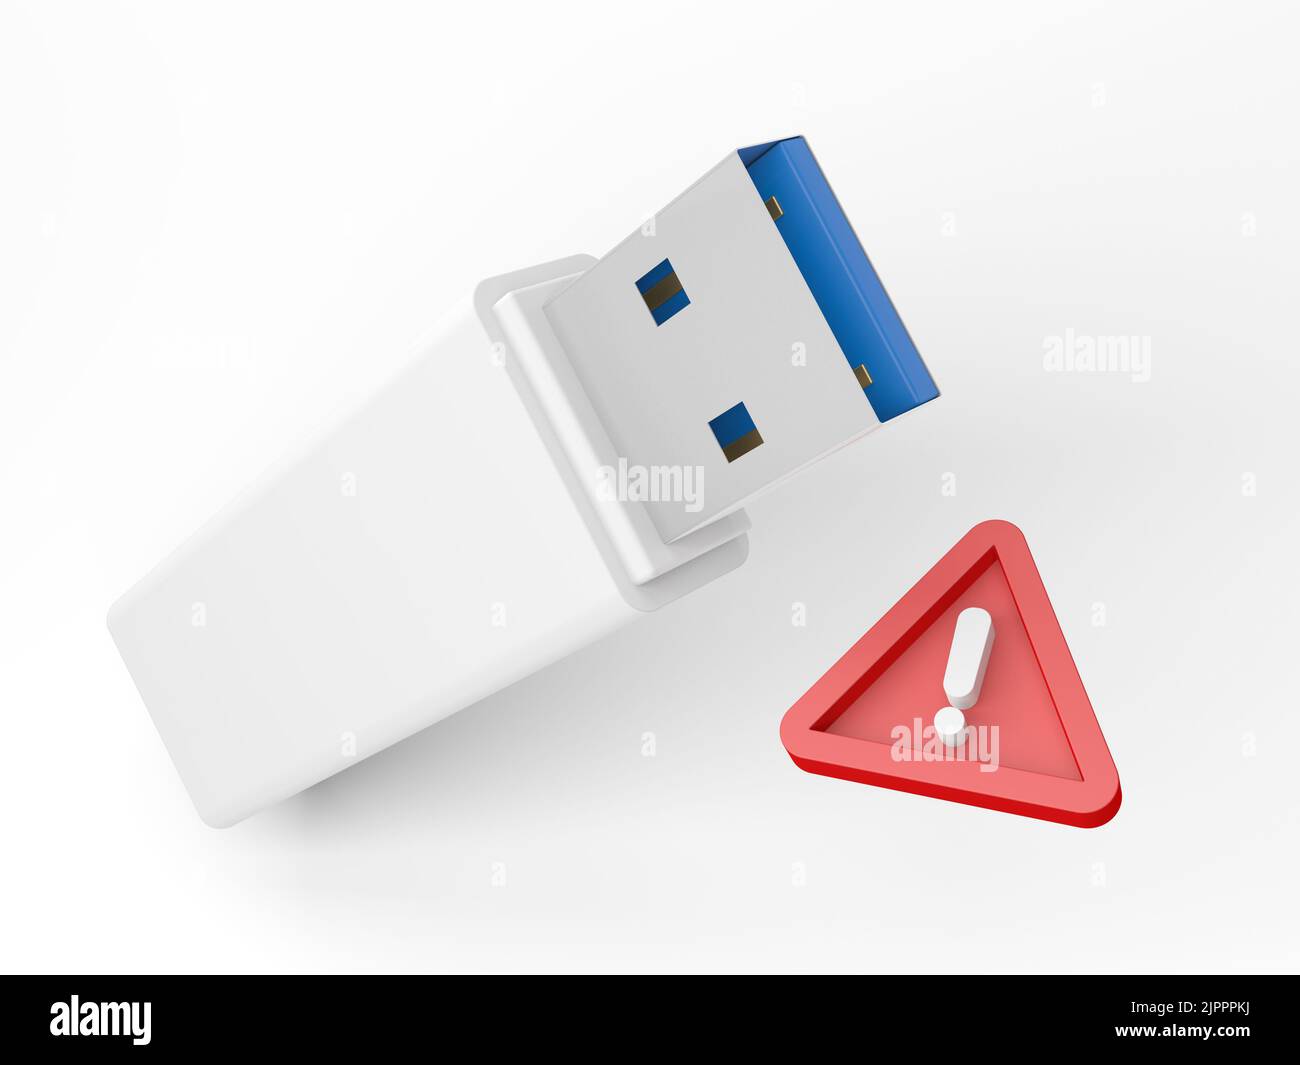 USB flash drive isolated on white background. Warning sign. Thumb drive. 3d illustration. Stock Photo